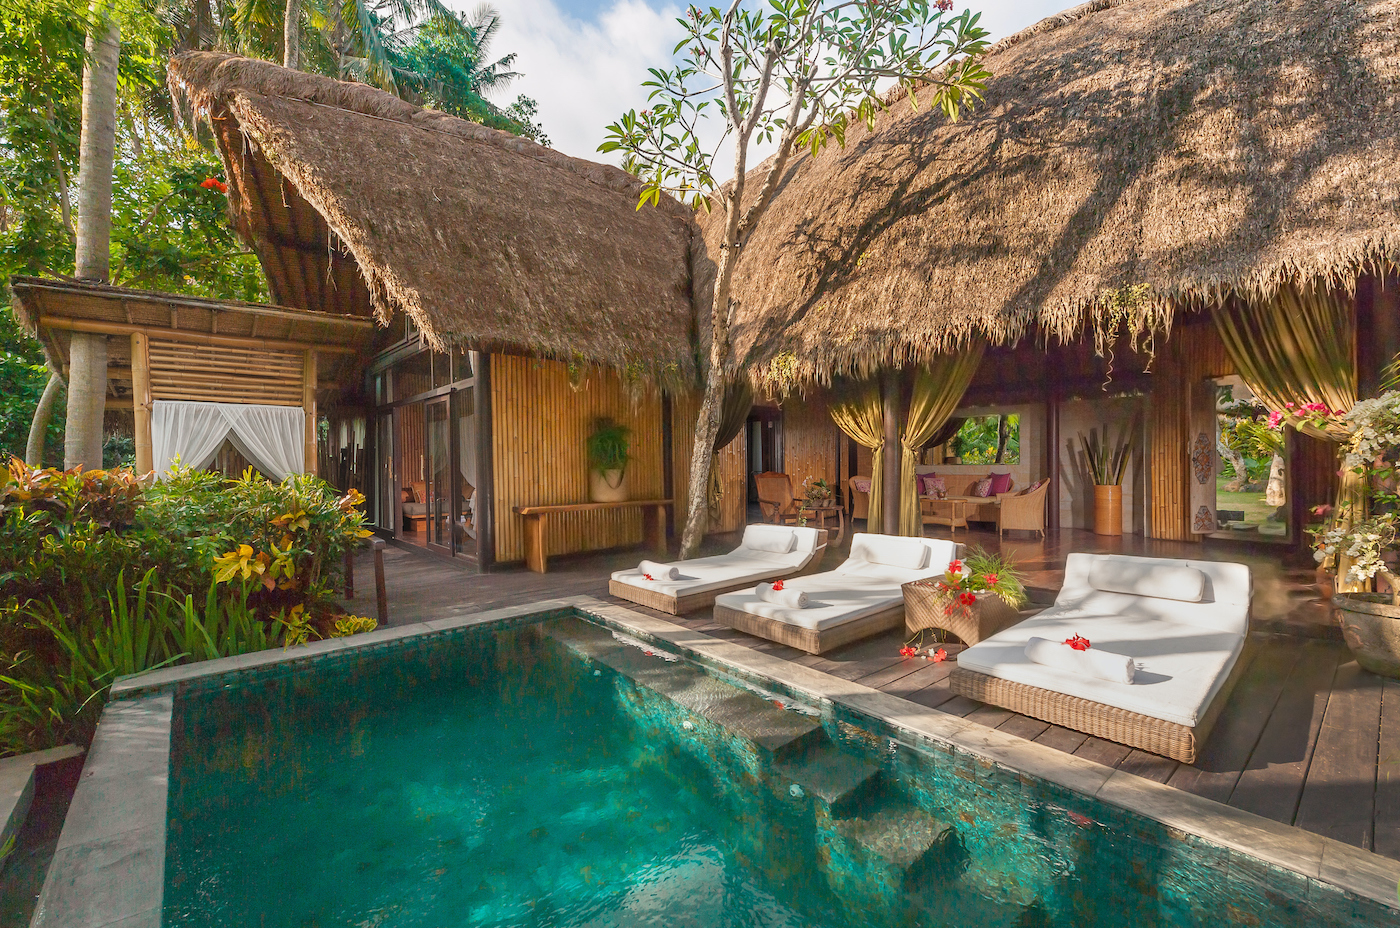 The 10 best eco-friendly hotels in Bali (tried & tested!) - The Hotel